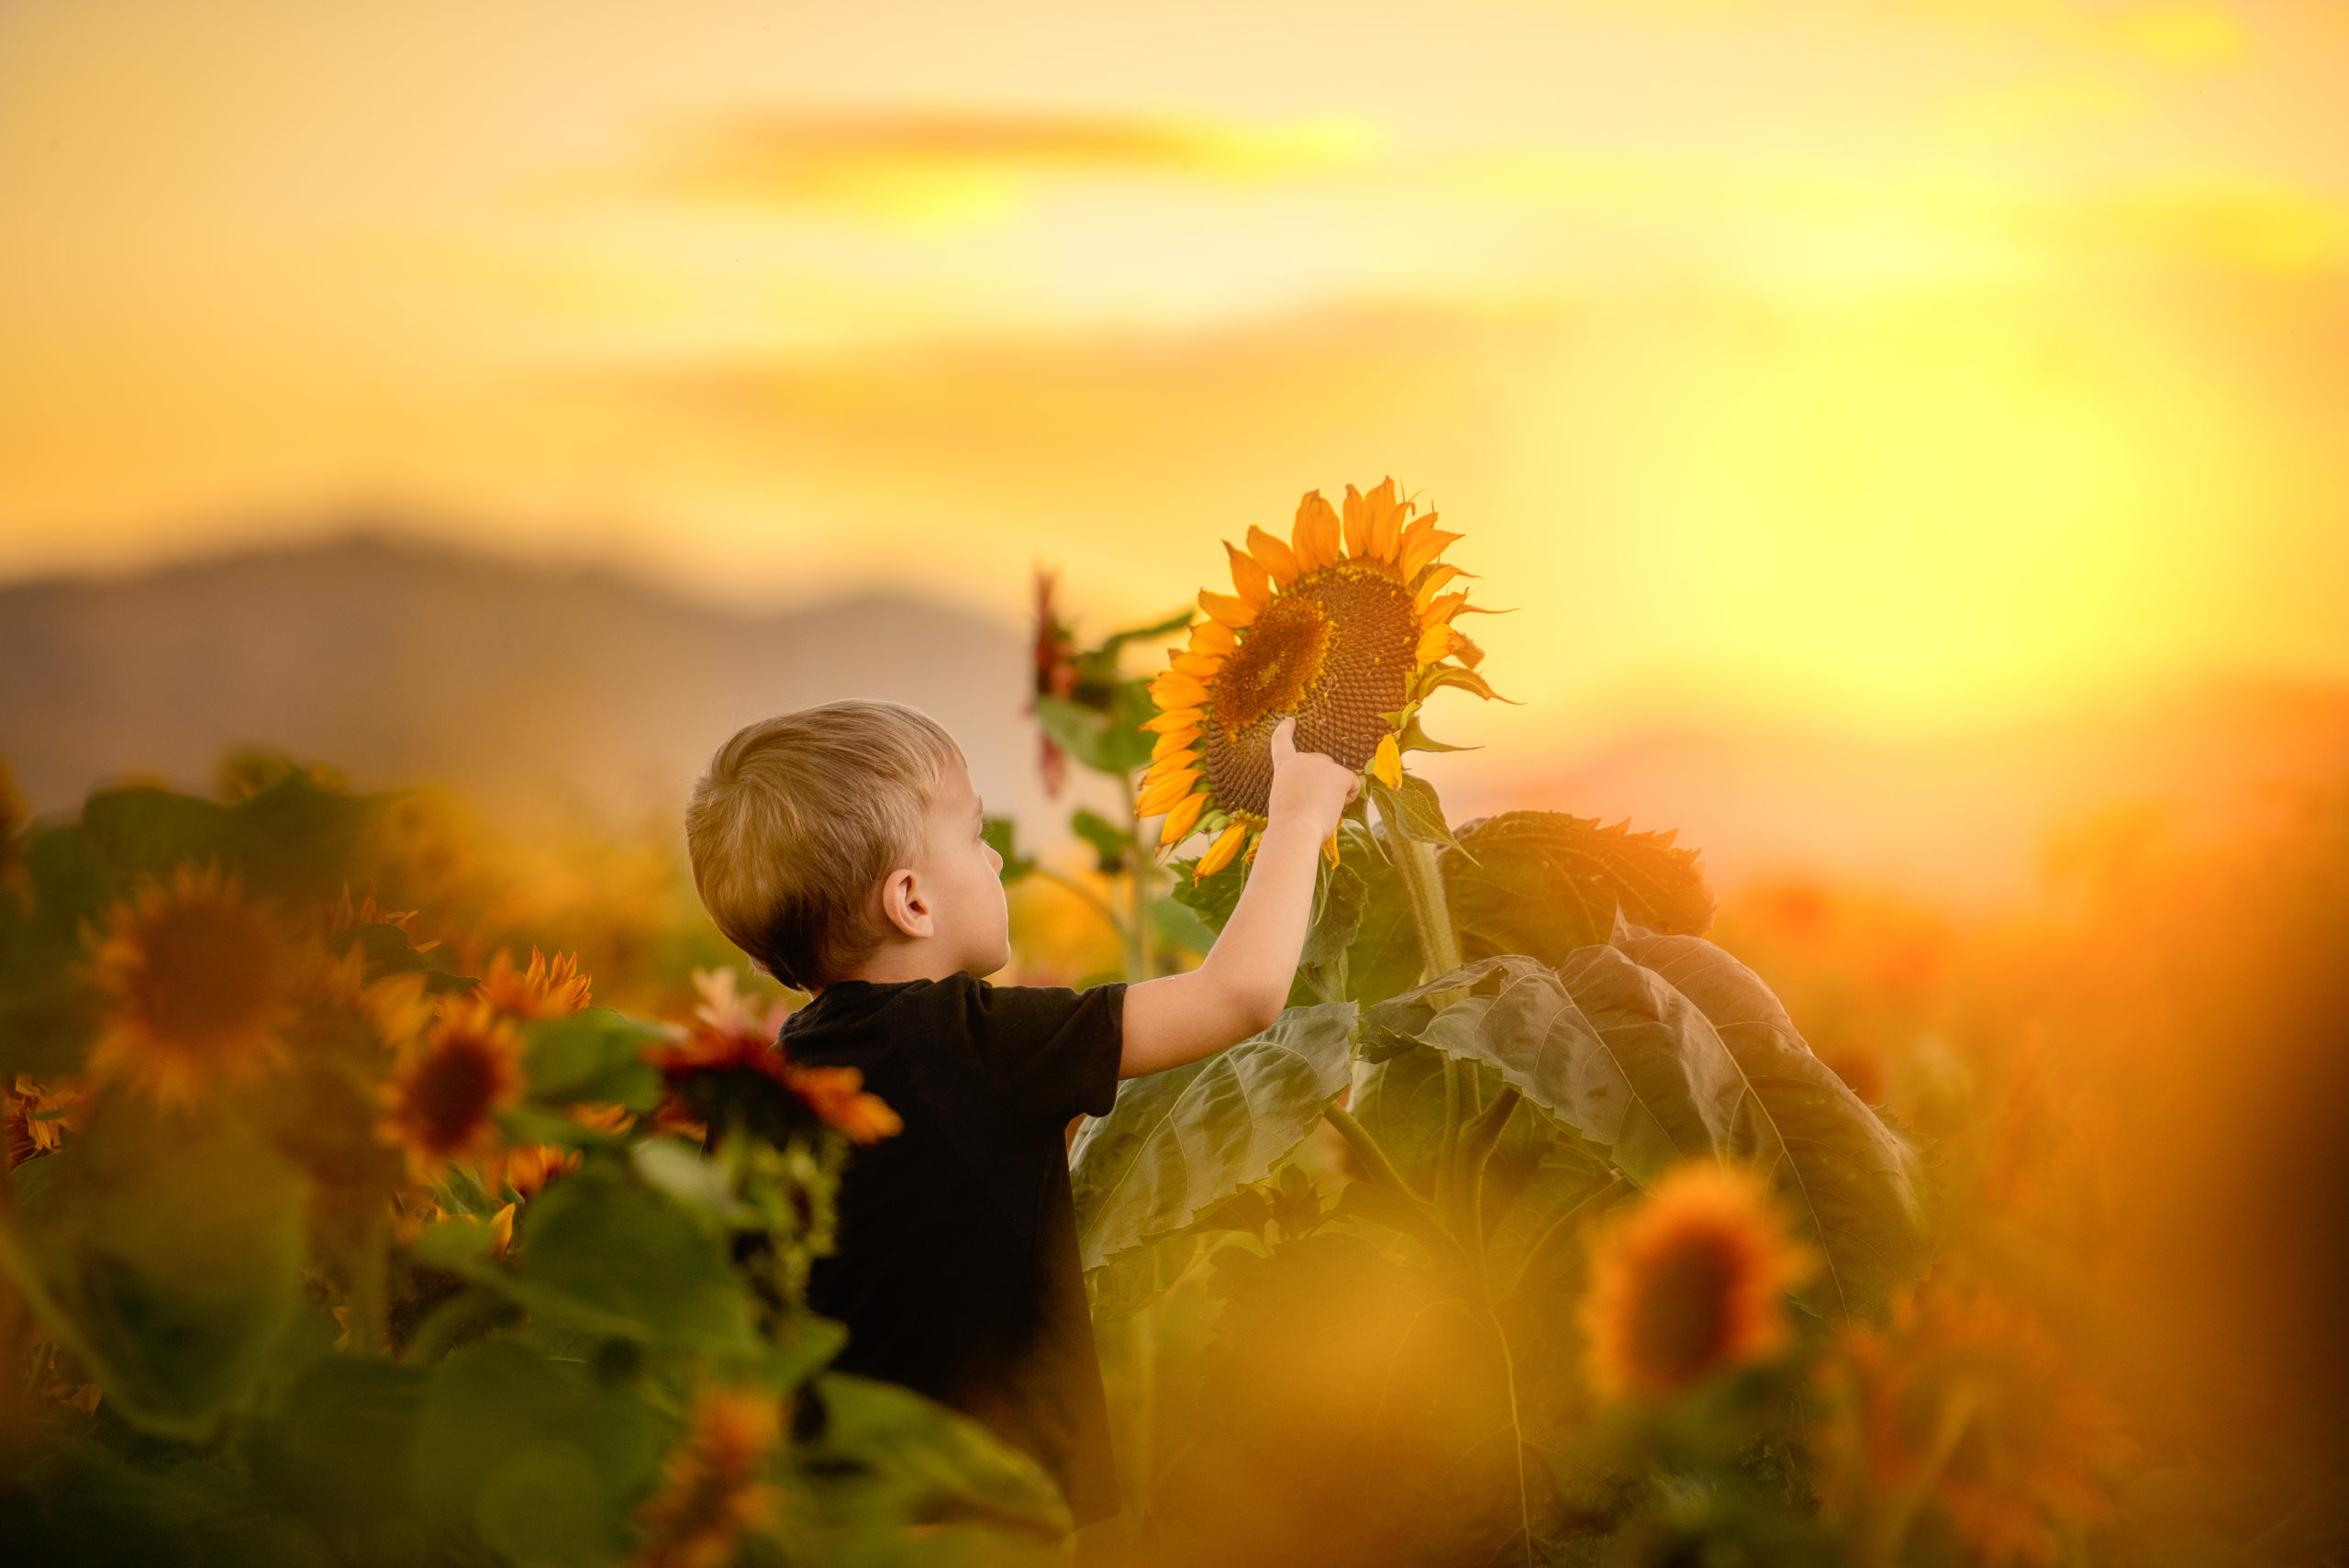 Photoshoot of a boy with the Sunflowers Vancouver Portrait Photographer